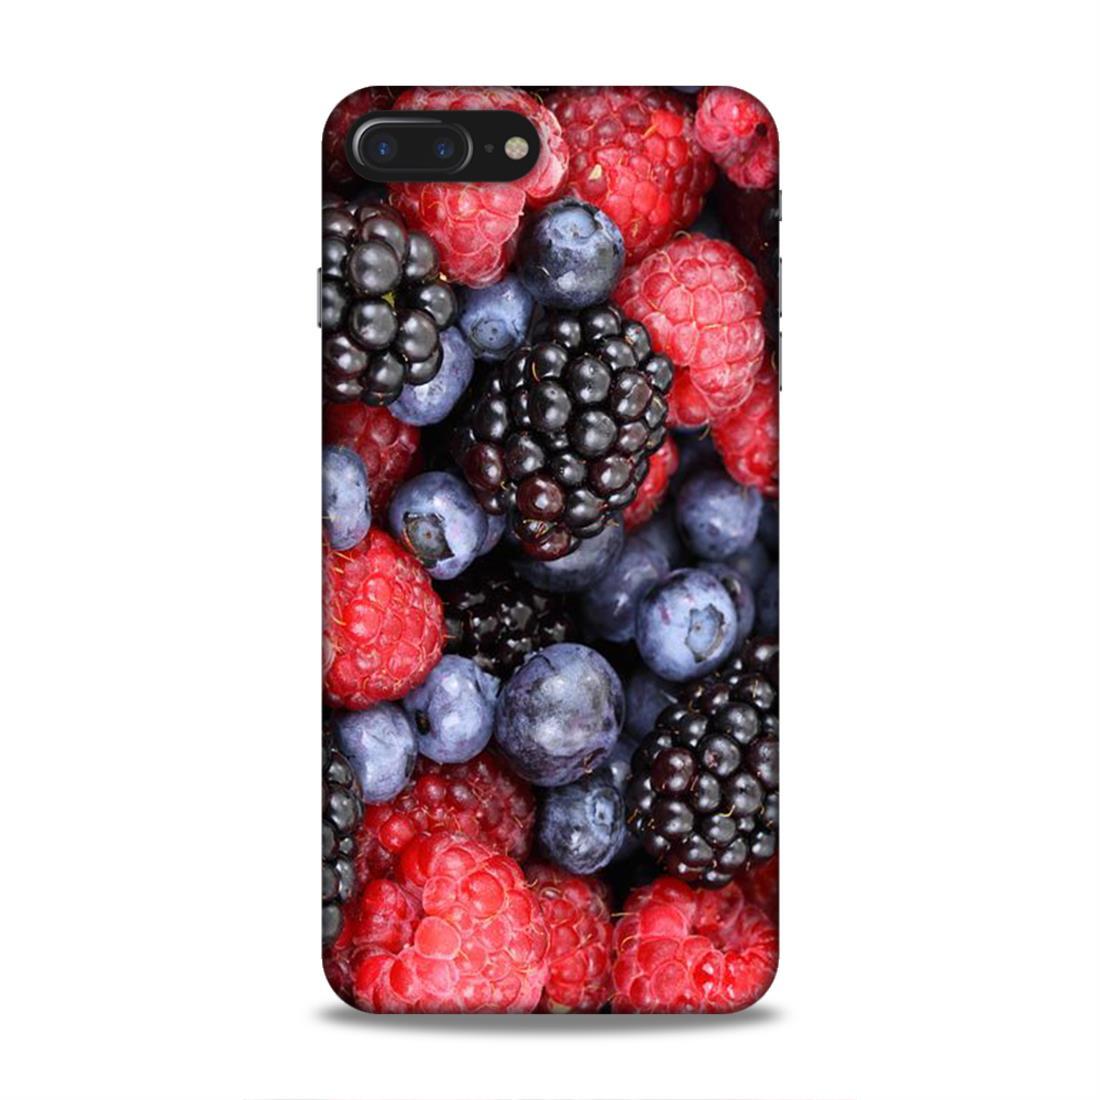 MultiFruits Love iPhone 7 Plus Mobile Back Case